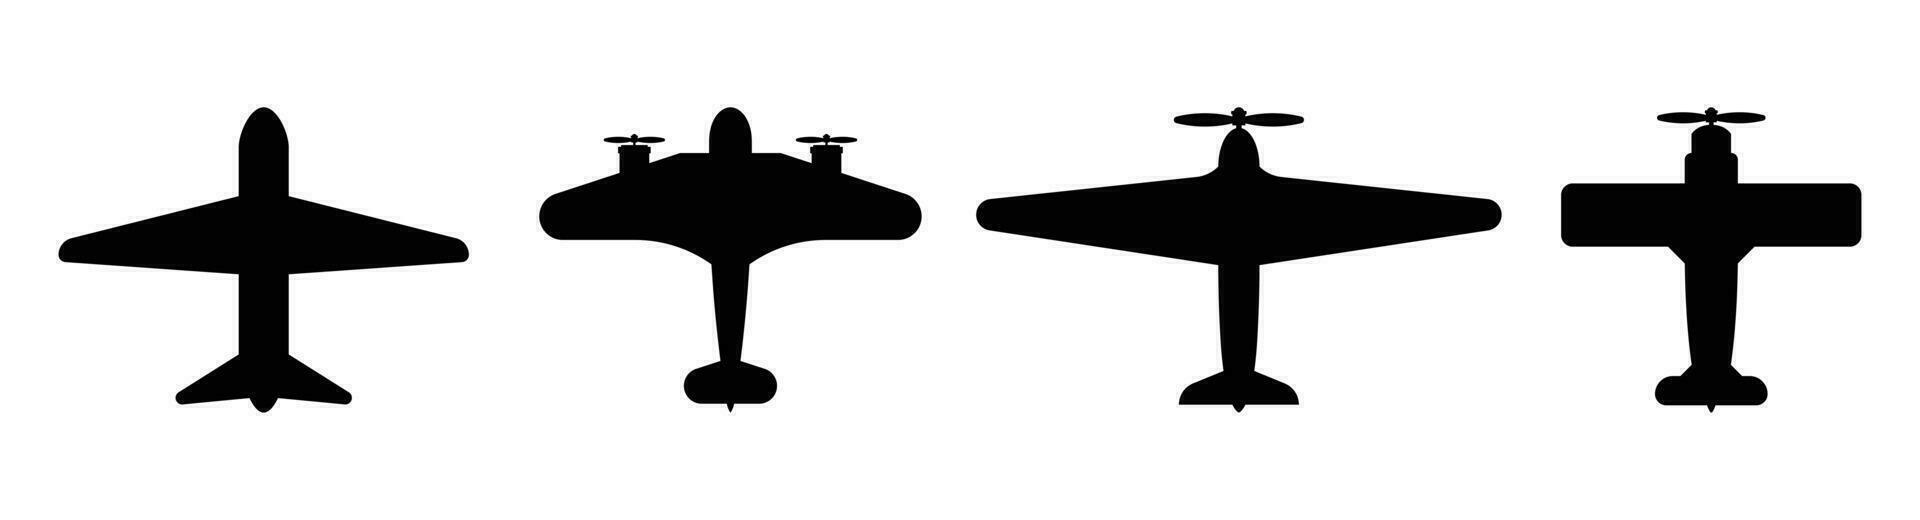 Top view of plane silhouette icon set. Vector illustration isolated on white